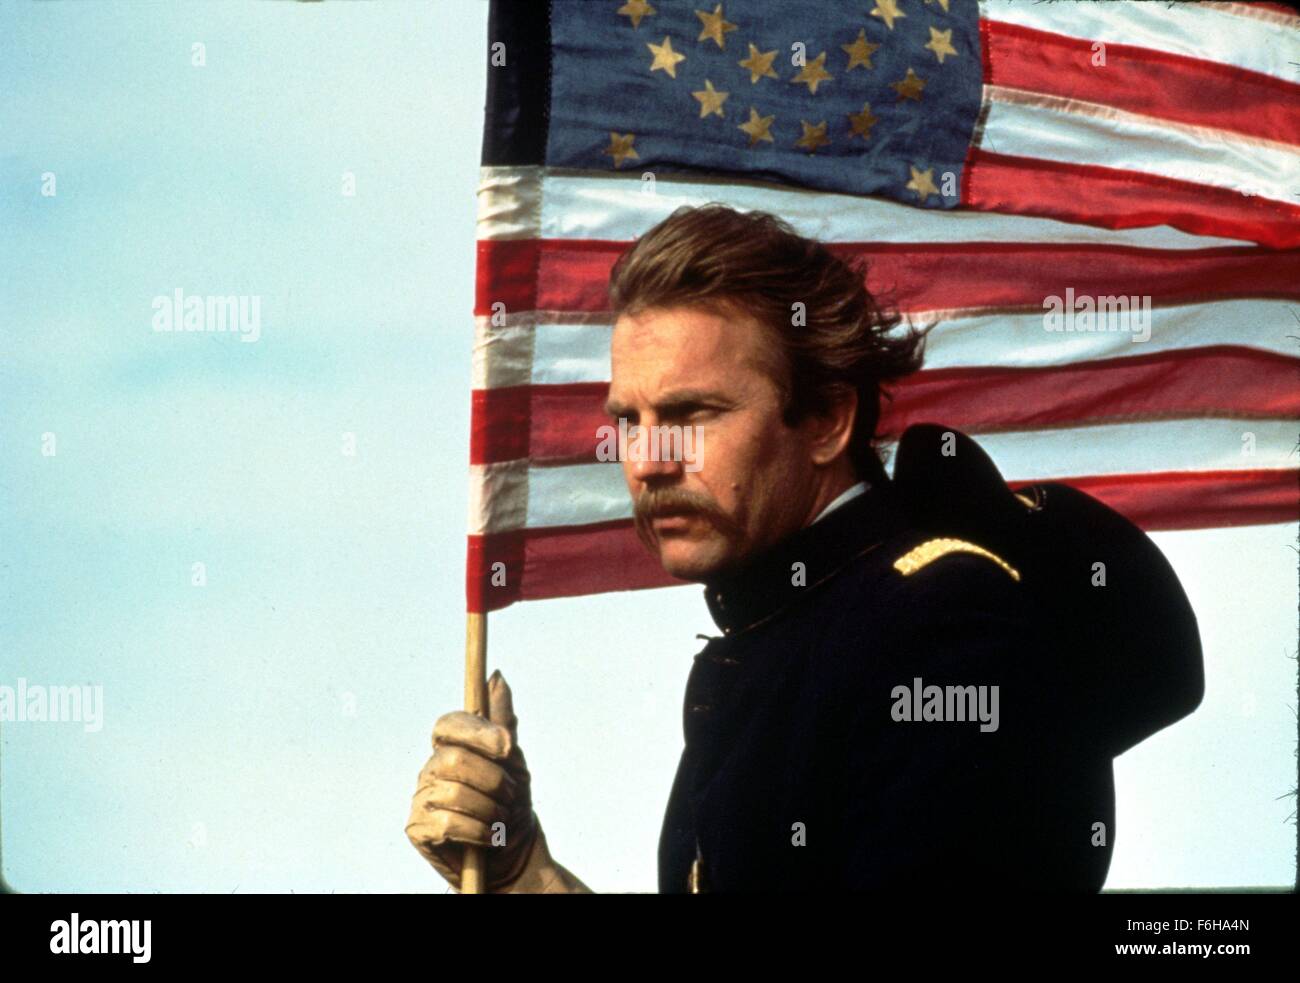 1990, Film Title: DANCES WITH WOLVES, Director: KEVIN COSTNER, Pictured: KEVIN COSTNER, PATRIOTIC, AMERICAN FLAG, CIVIL WAR, MOUSTACHE, MILITARY, UNIFORM, RIDING. (Credit Image: SNAP) Stock Photo